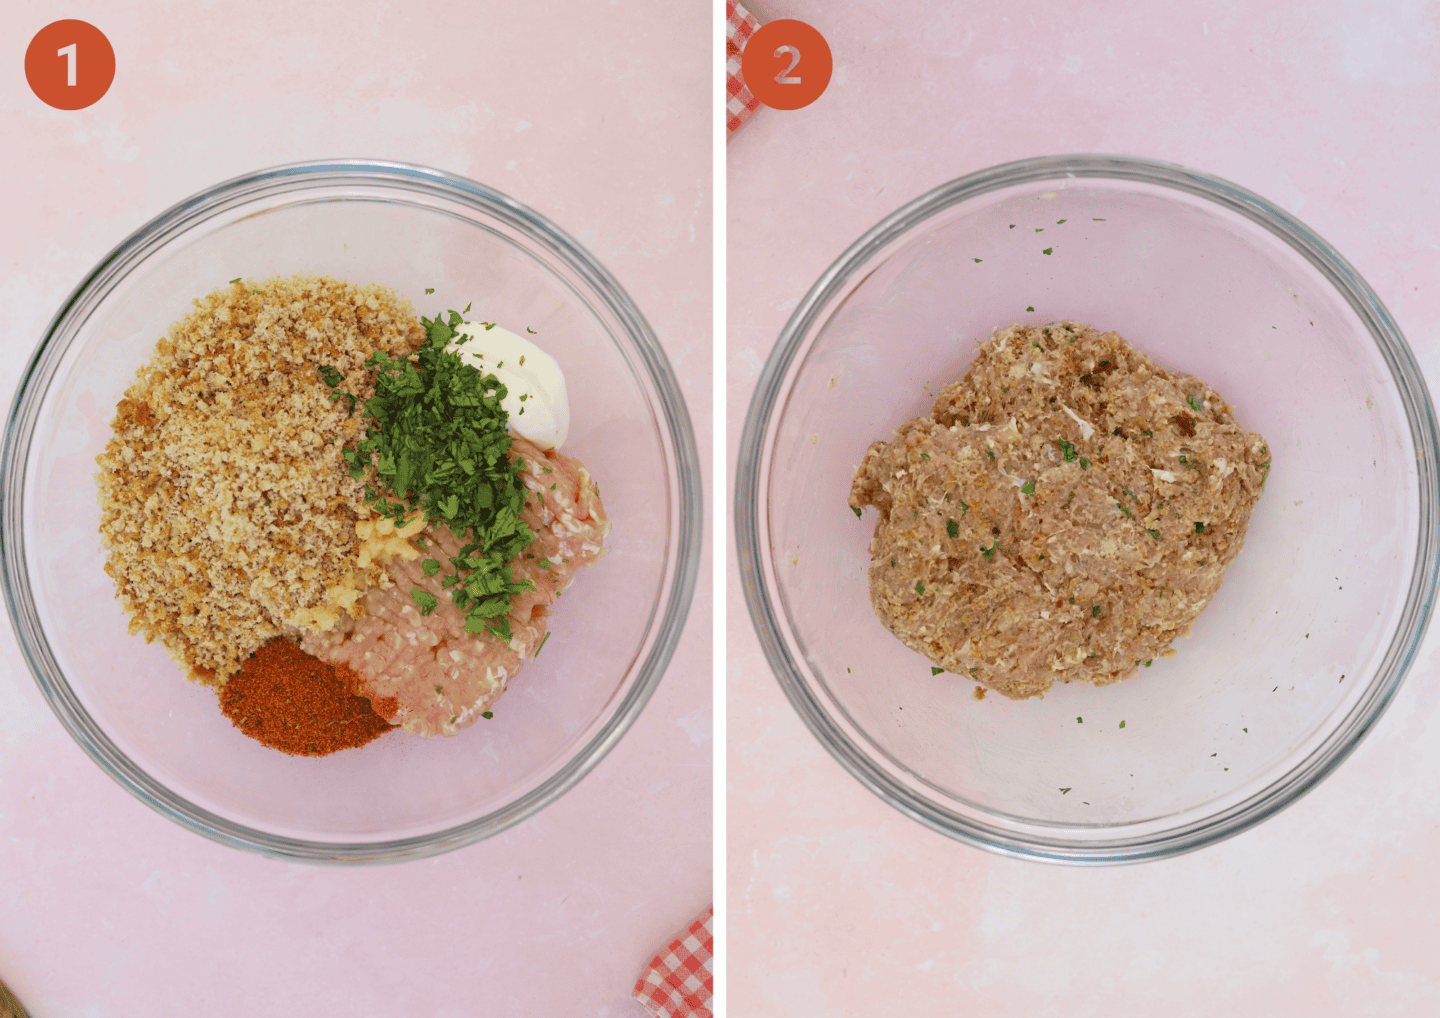 The chicken burger ingredients in a bowl (left) and mixed together (right).